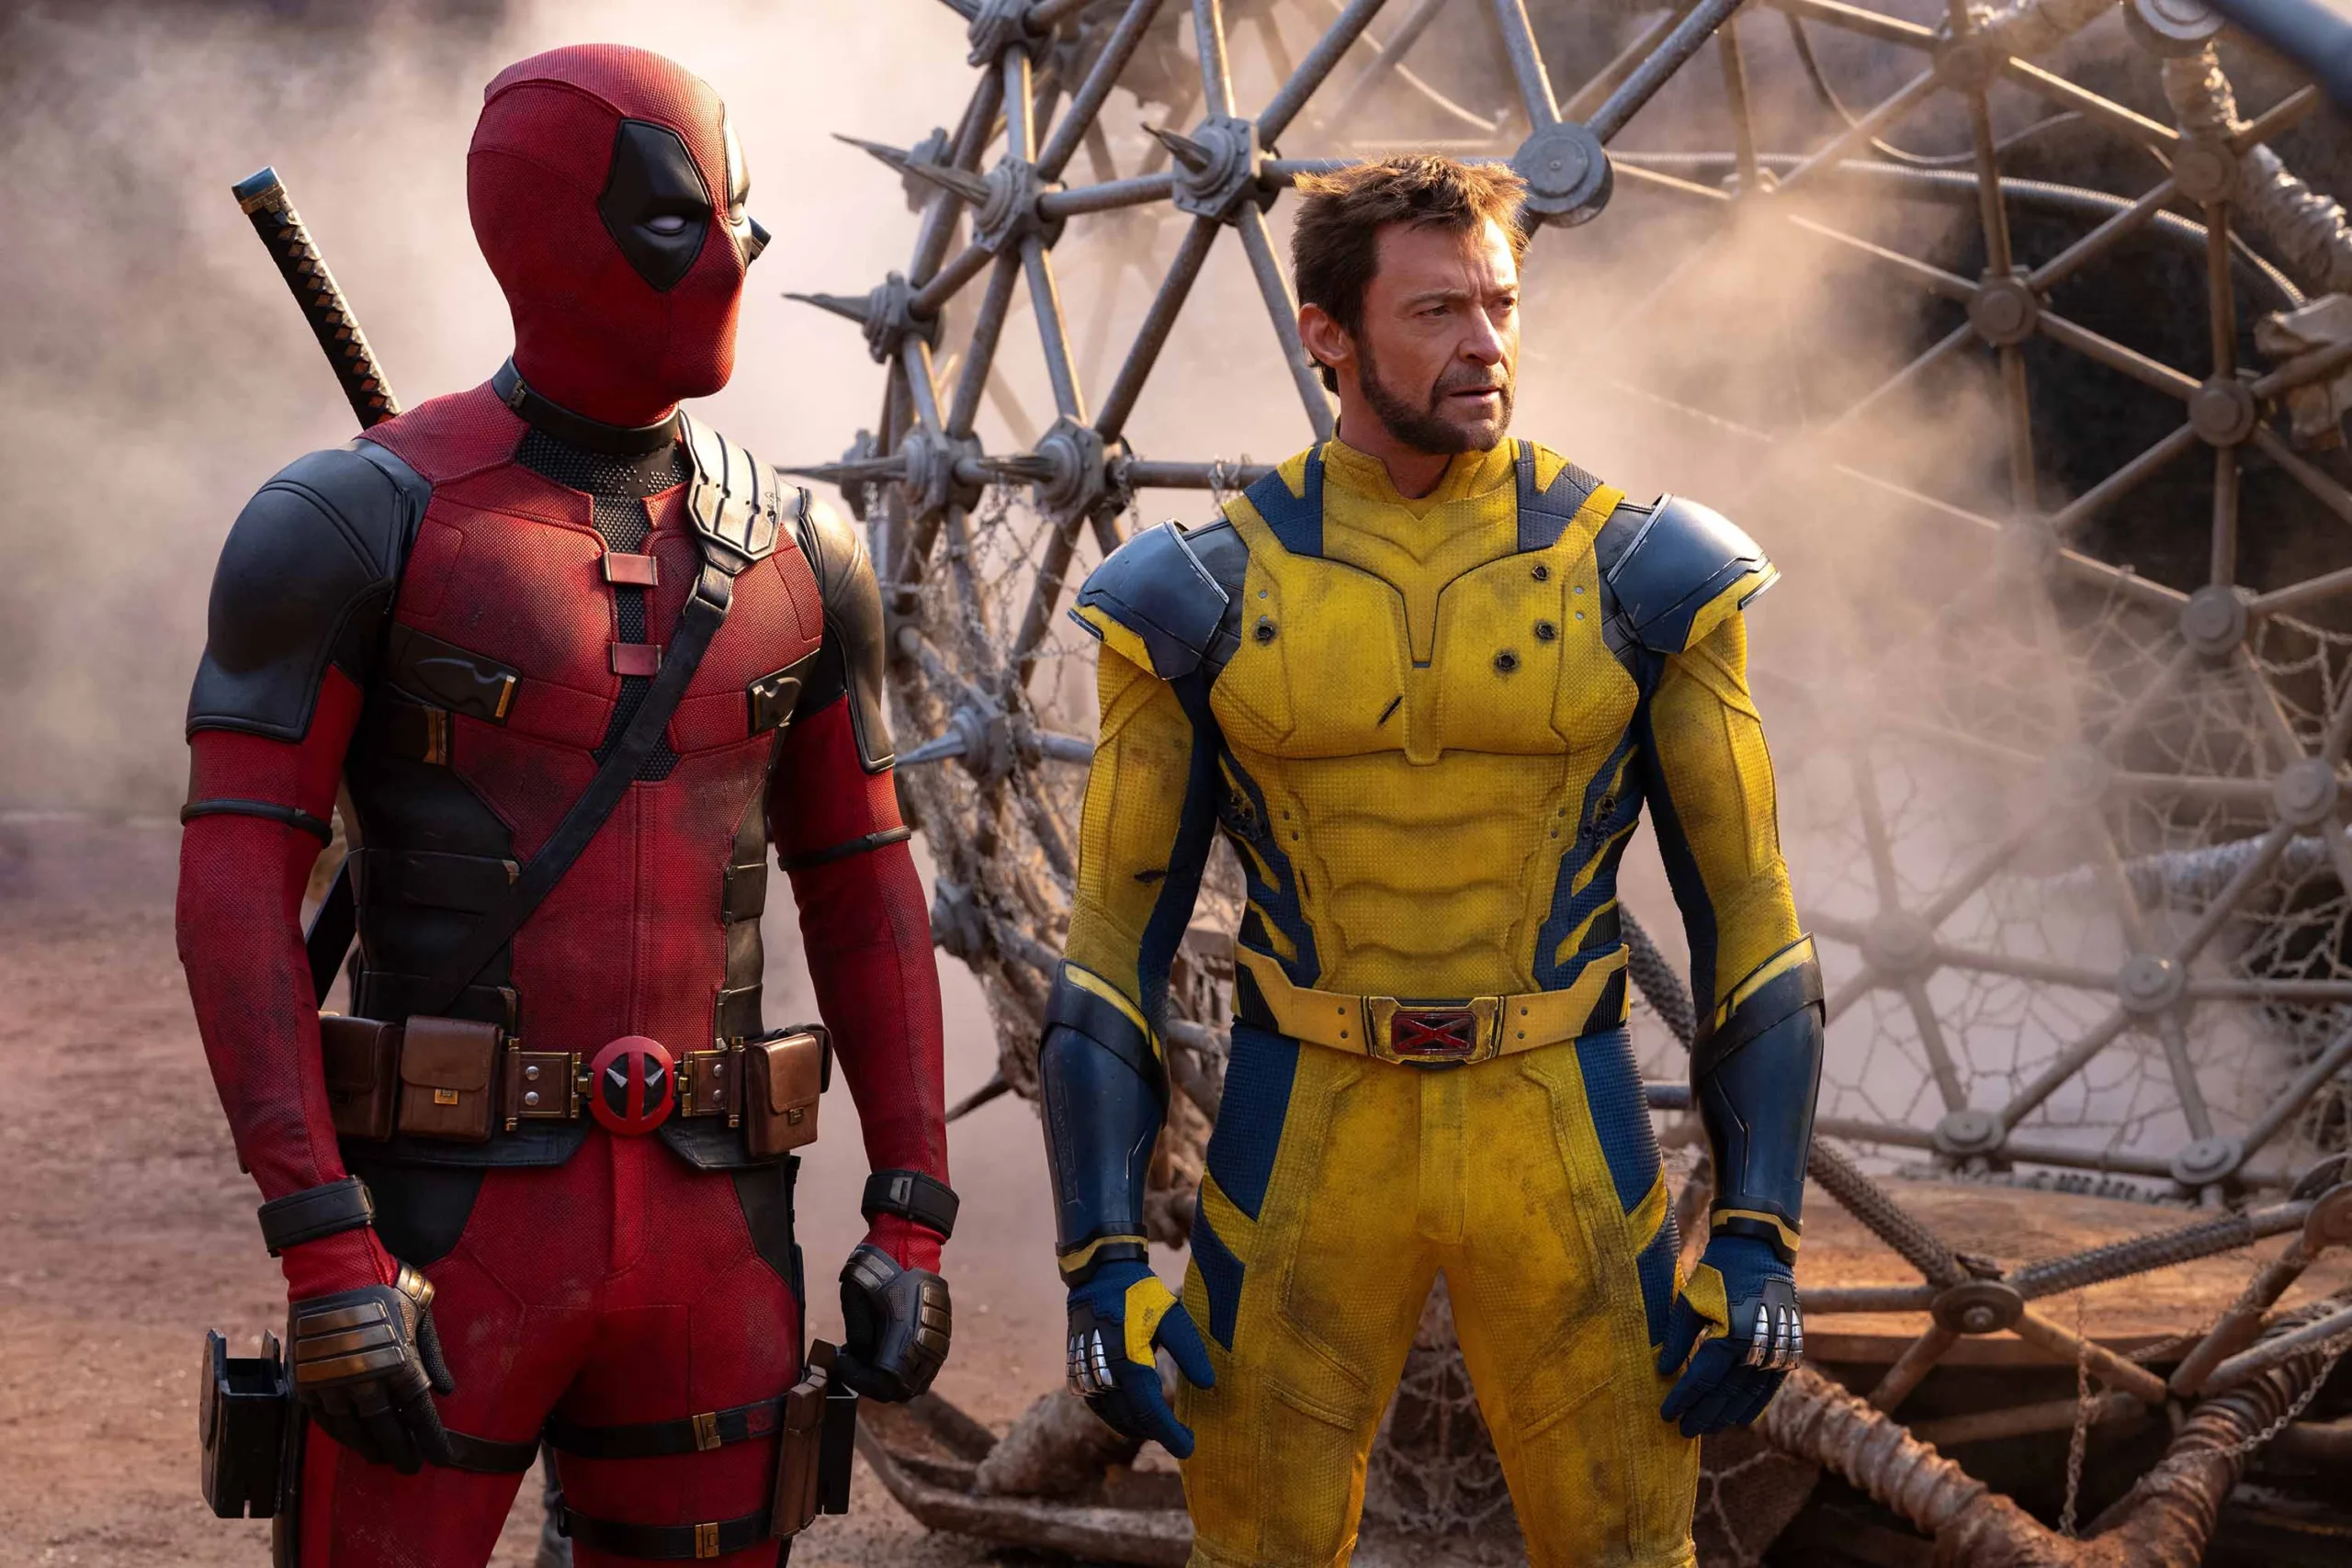 Deadpool & Wolverine review: too focused on the now